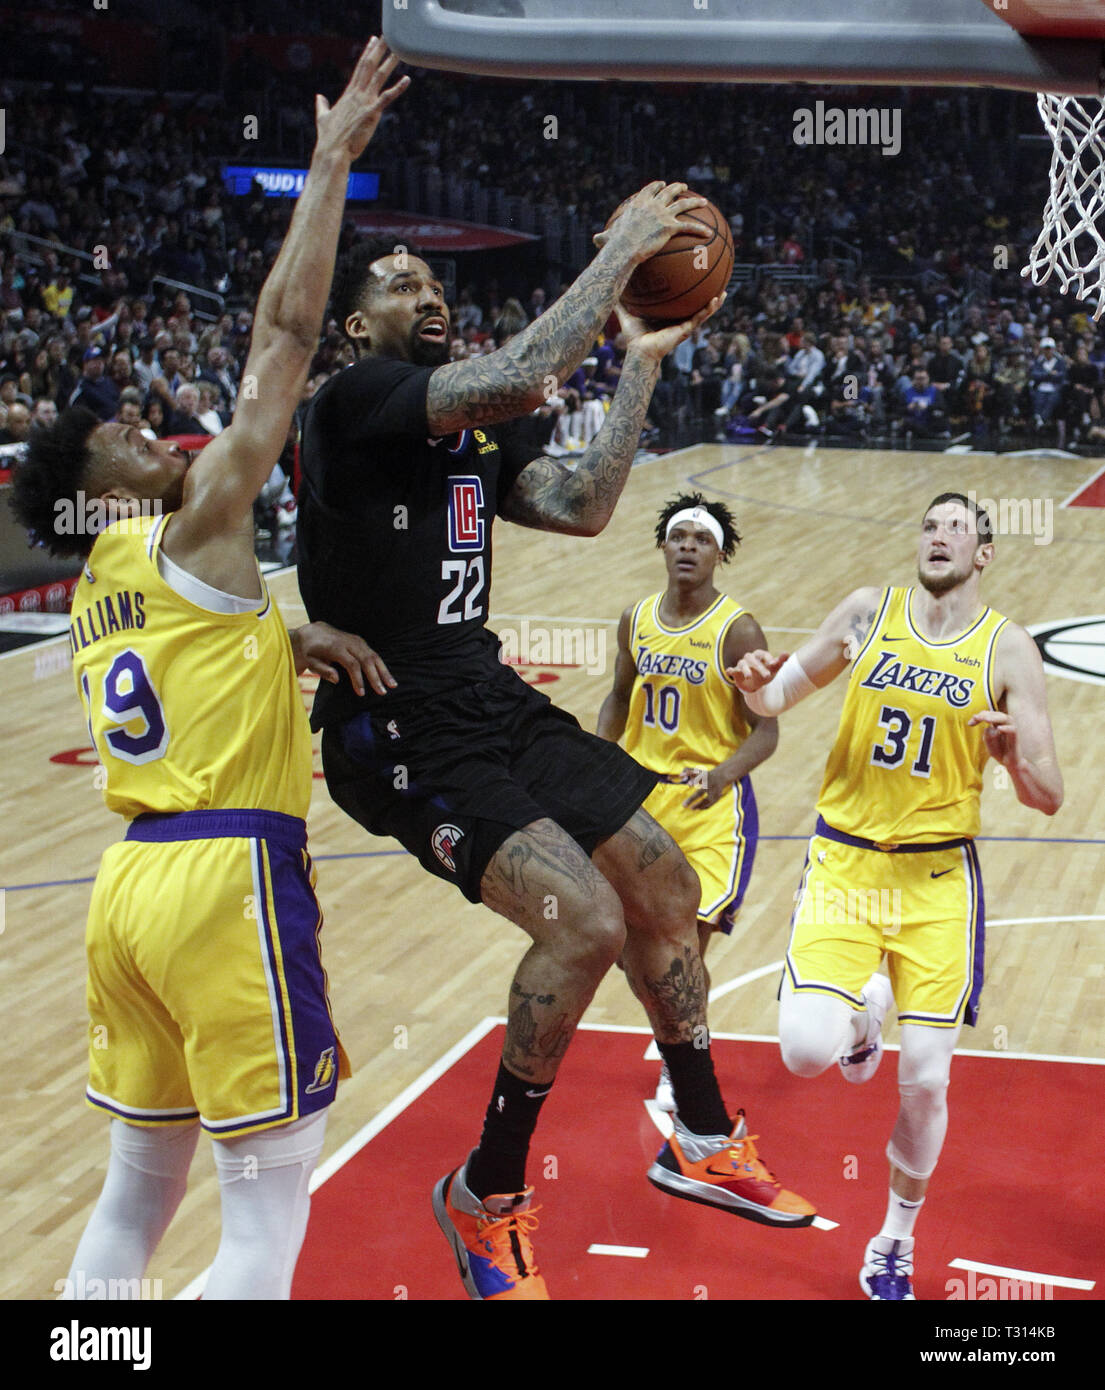 Los Angeles, California, USA. 5th Apr, 2019. Los Angeles Clippers' Wilson  Chandler (22) goes up to the basket while defended by Los Angeles Lakers'  Johnathan Williams (19) during an NBA basketball game